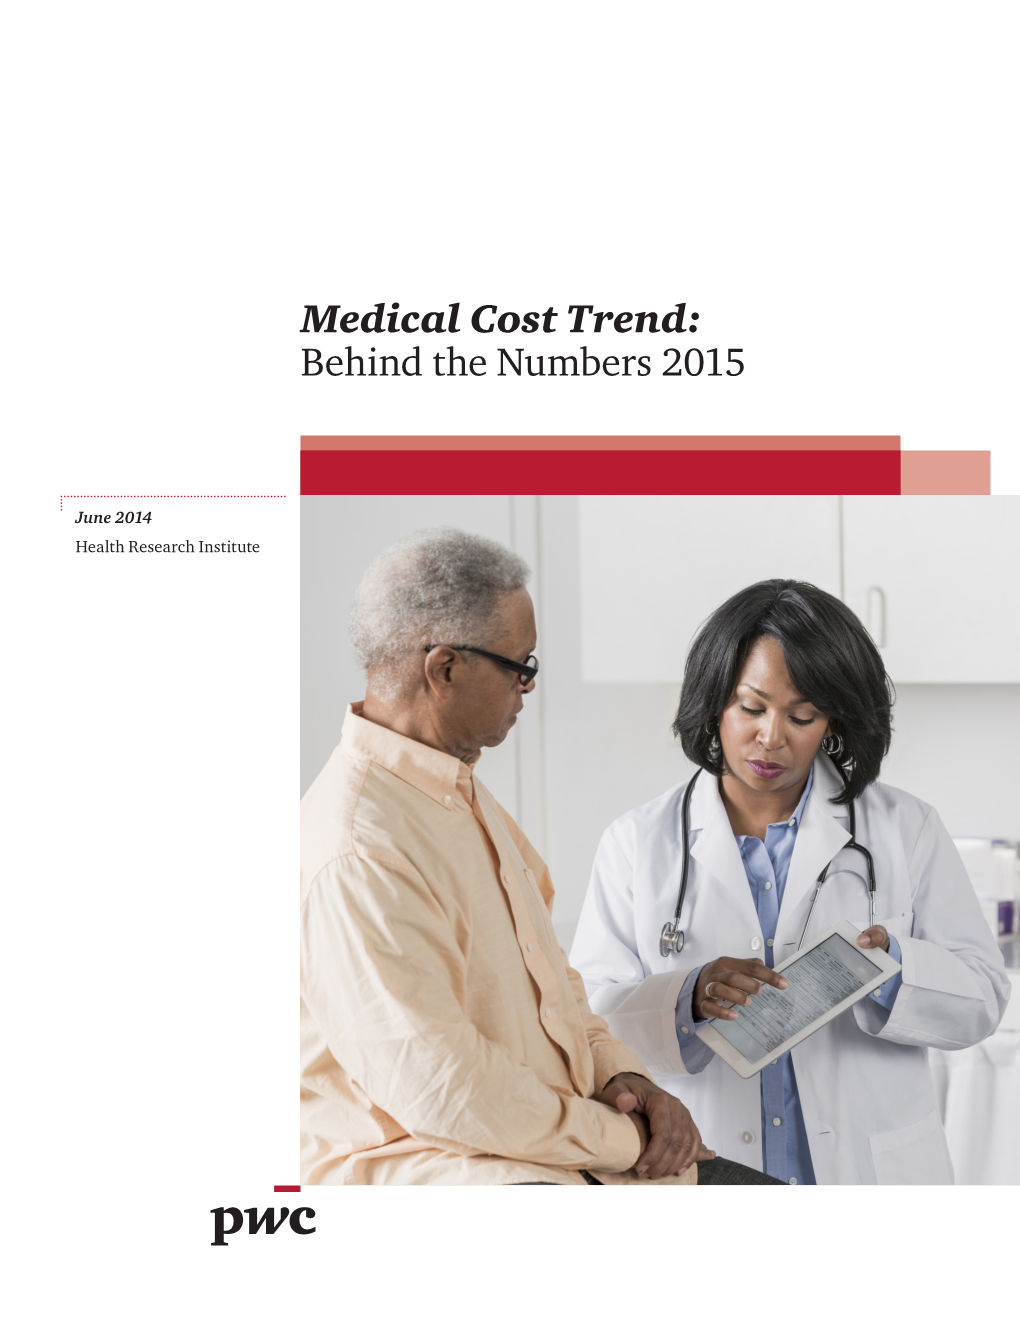 Medical Cost Trend: Behind the Numbers 2015